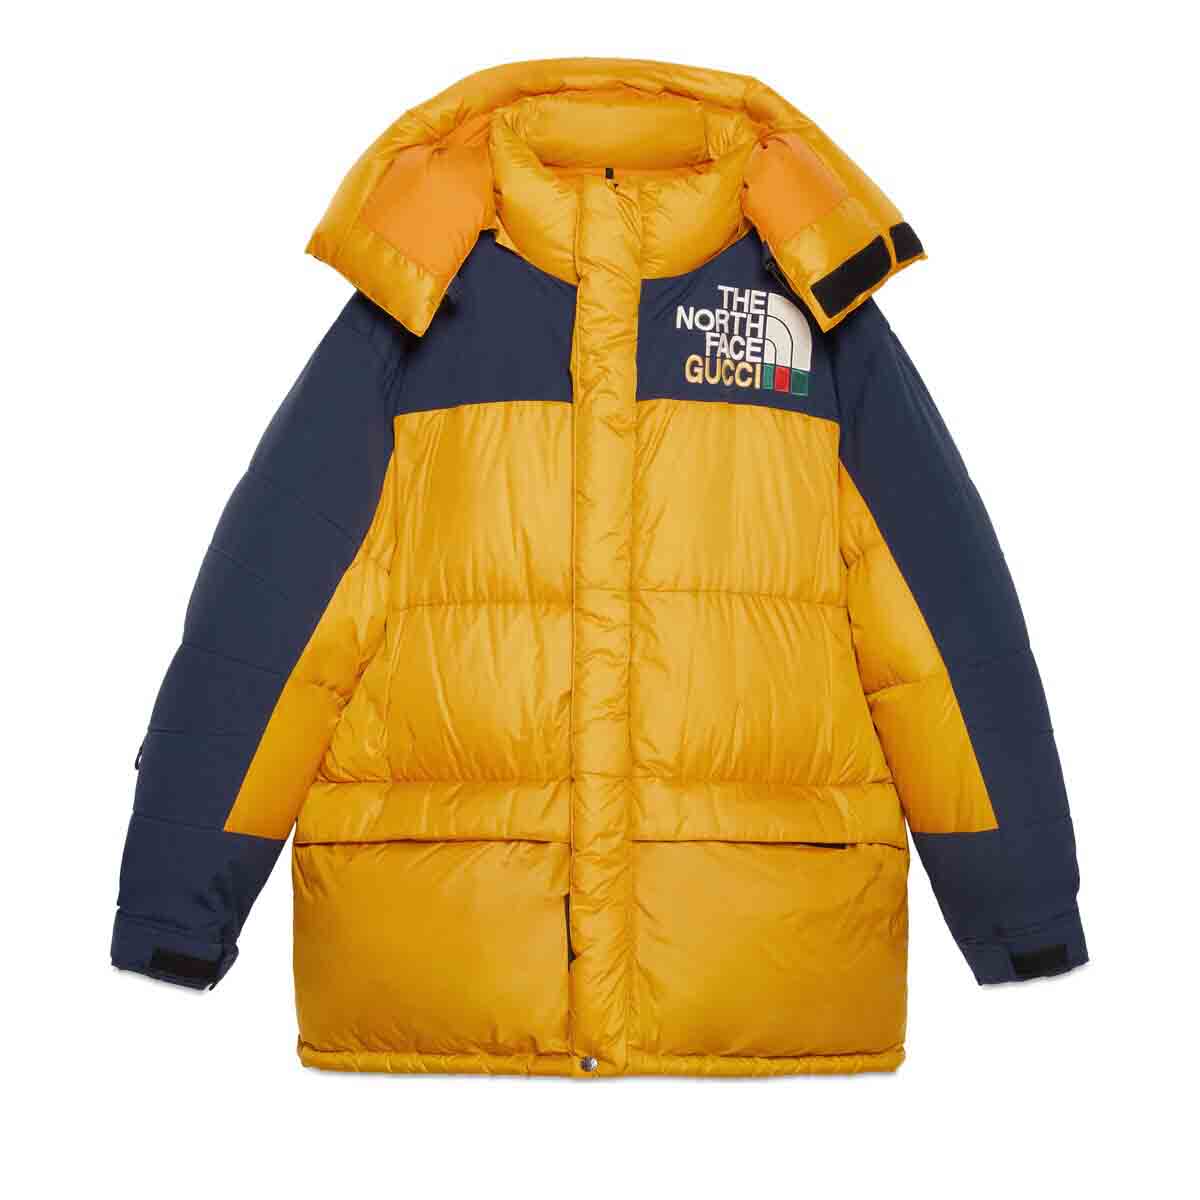 Gucci x The North Face Down Coat Black/Yellow